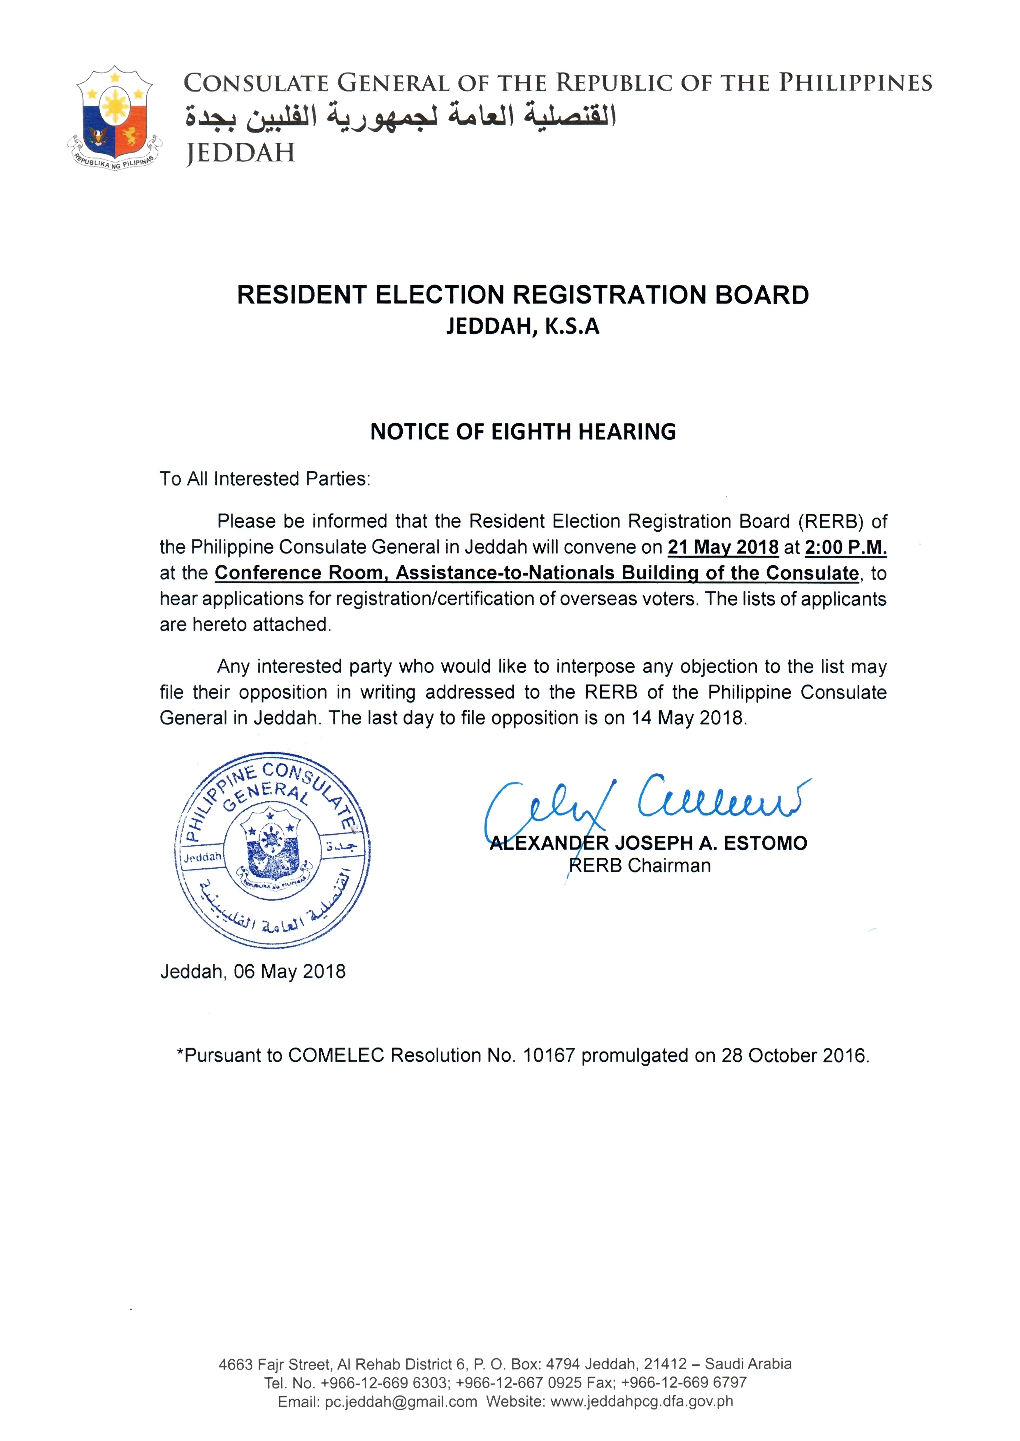 Notice of Eighth Hearing